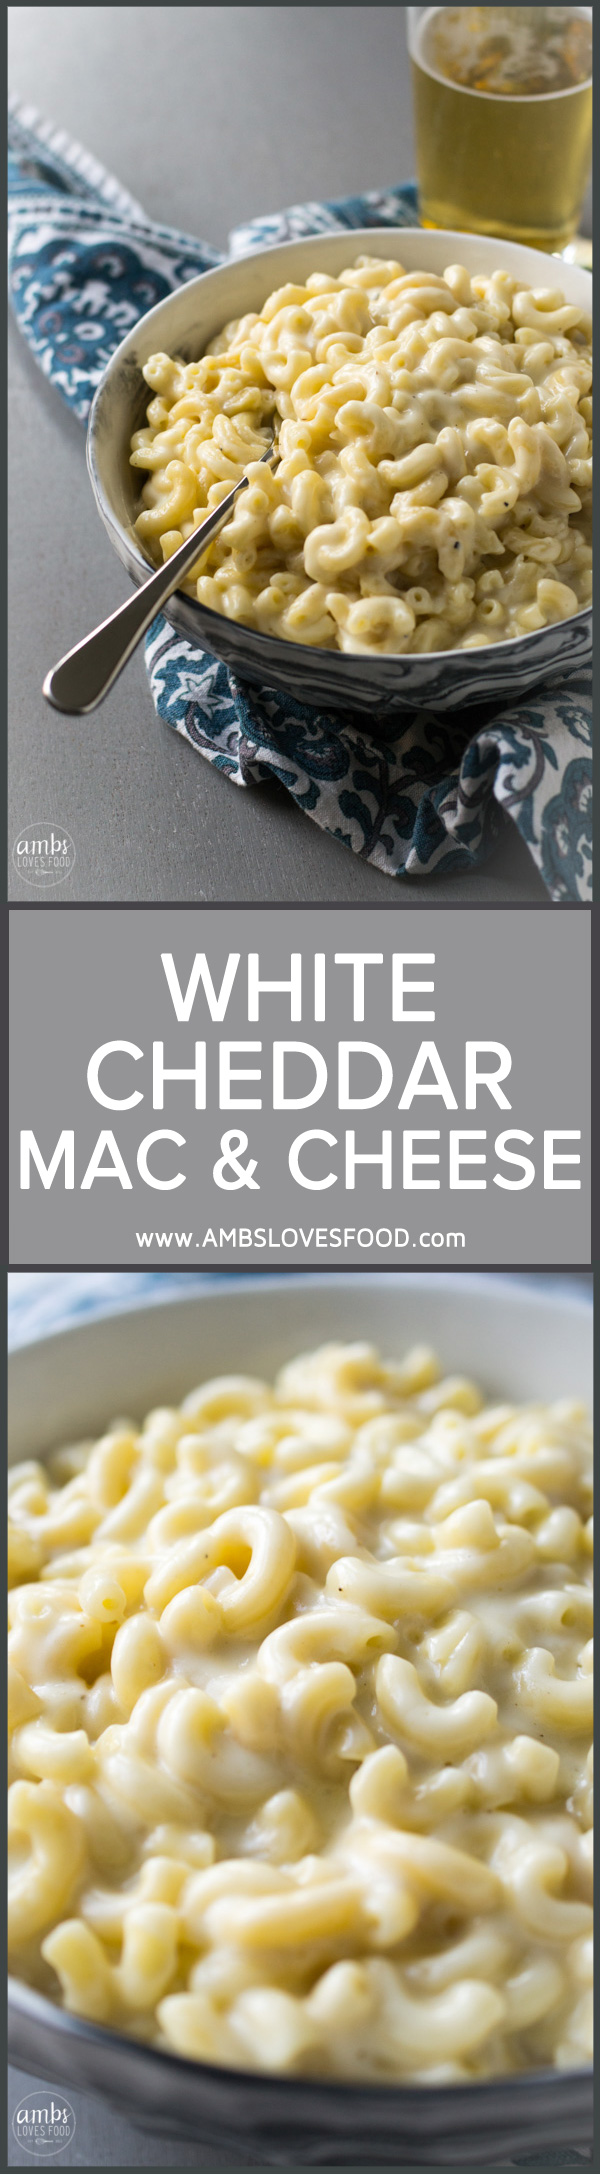 devour white cheddar mac and cheese